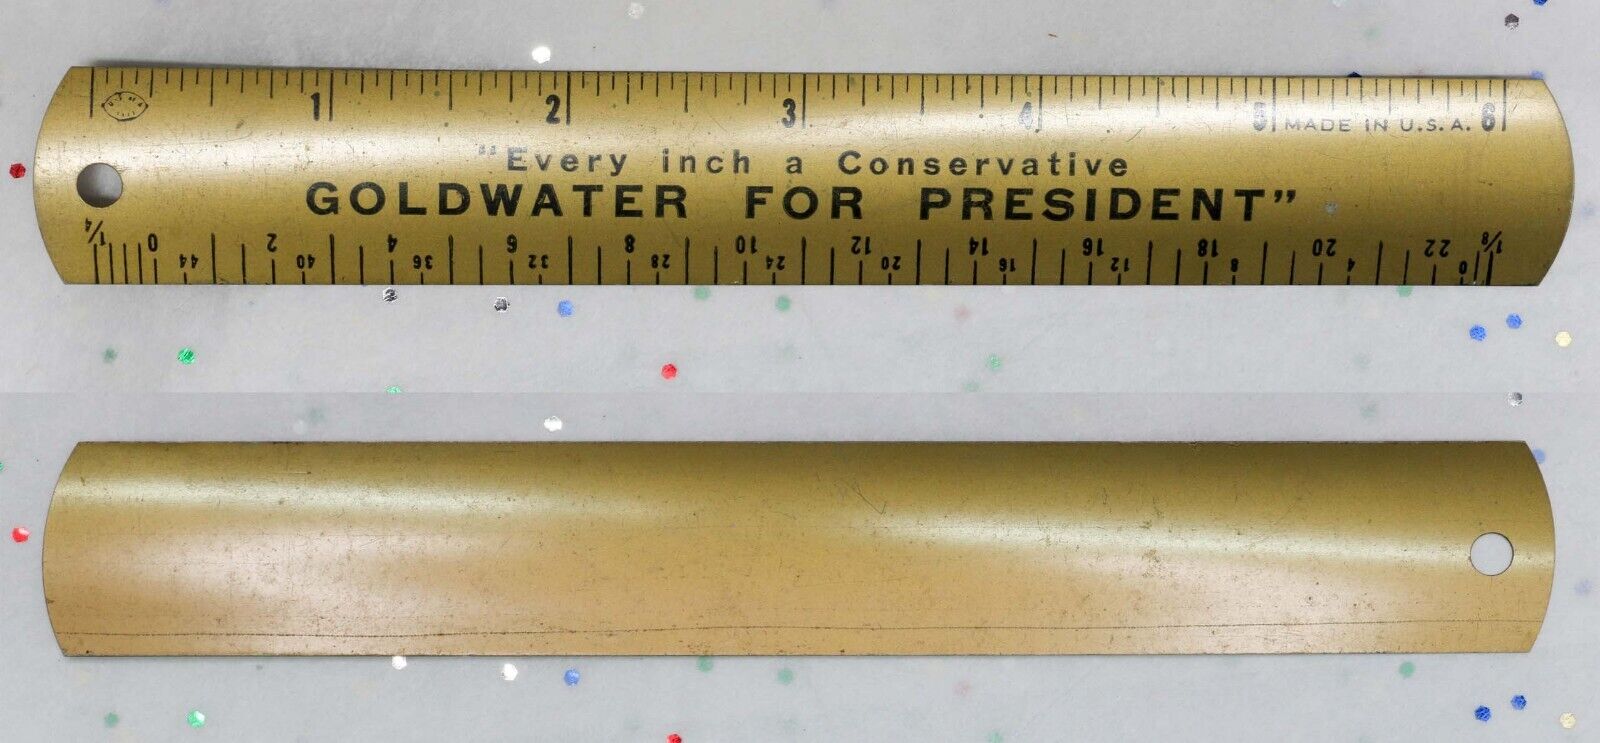 GOLDWATER FOR PRESIDENT \'64 Political Campaign Ruler • Every Inch a Conservative